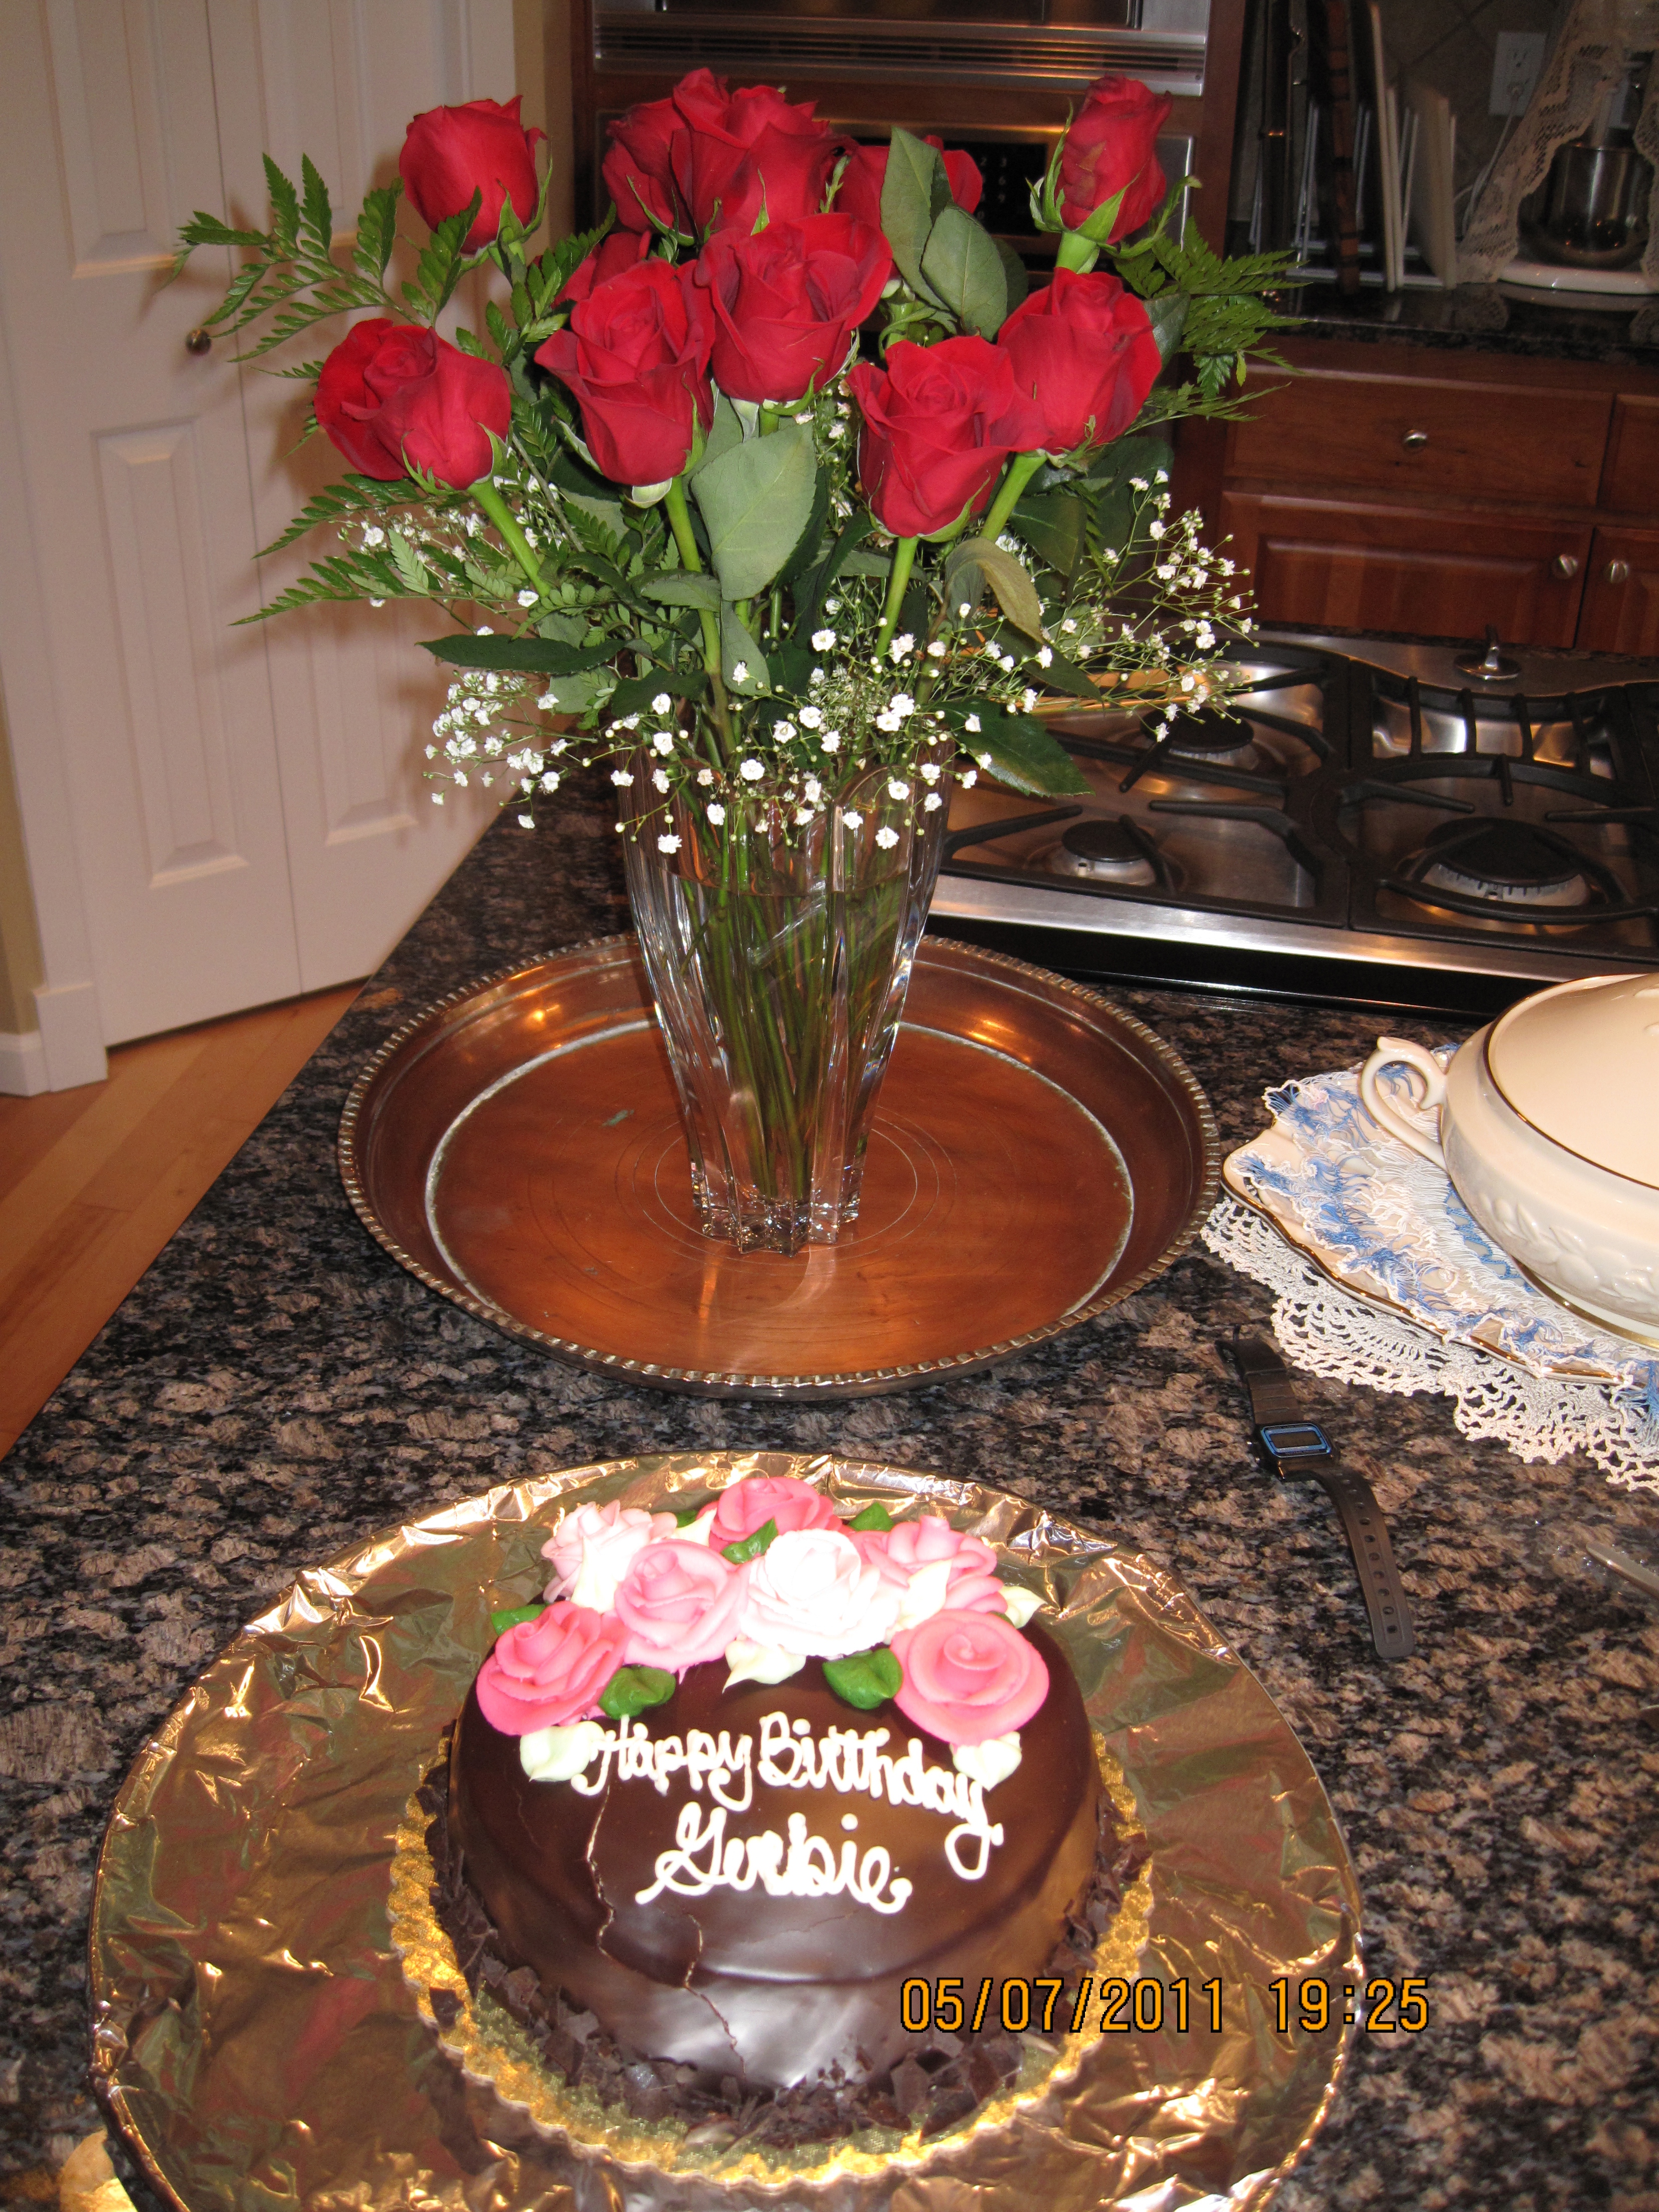 roses and bday cake